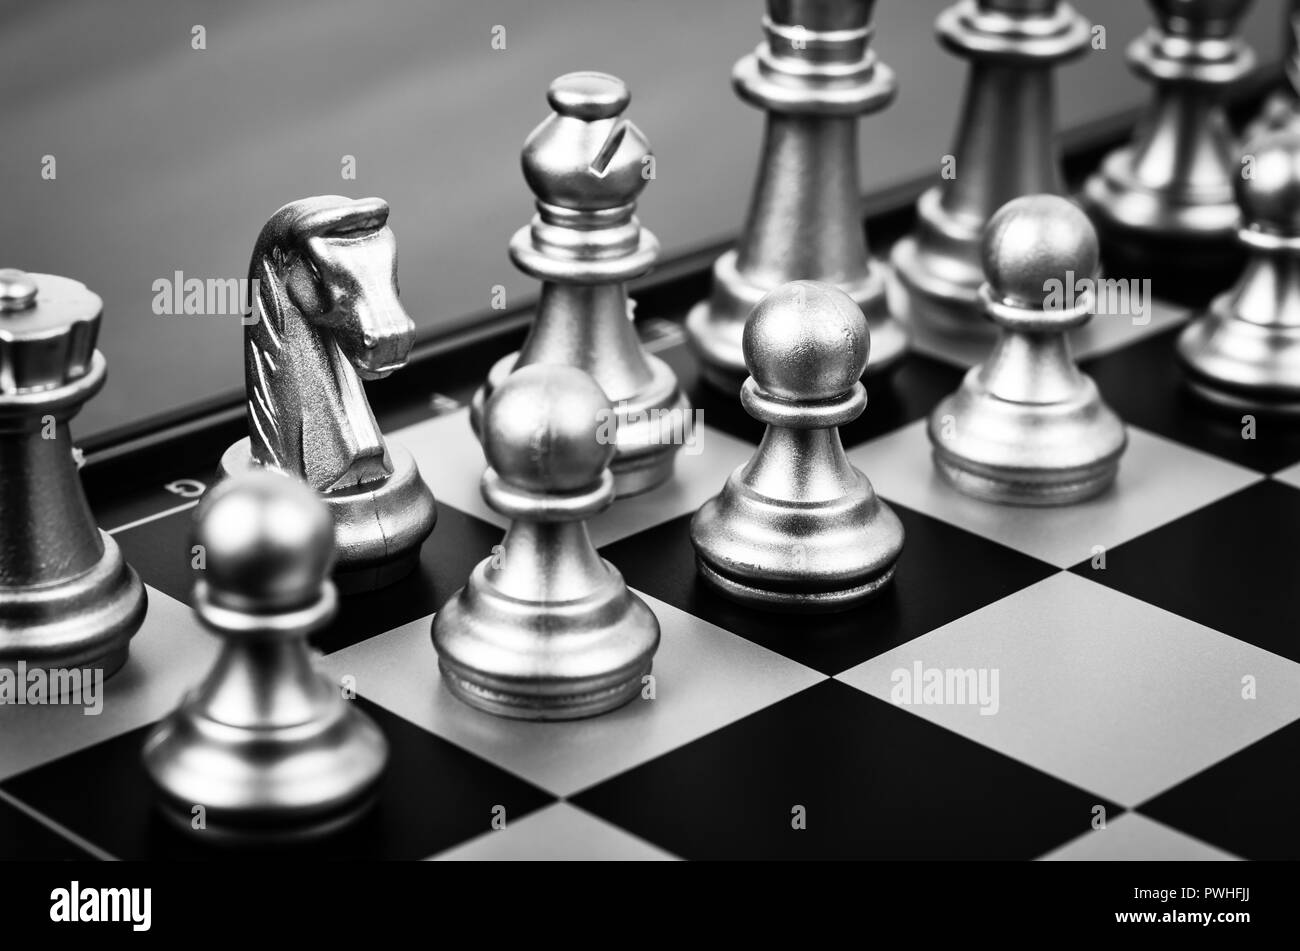 chess pieces on a black and white chess board. Stock Photo